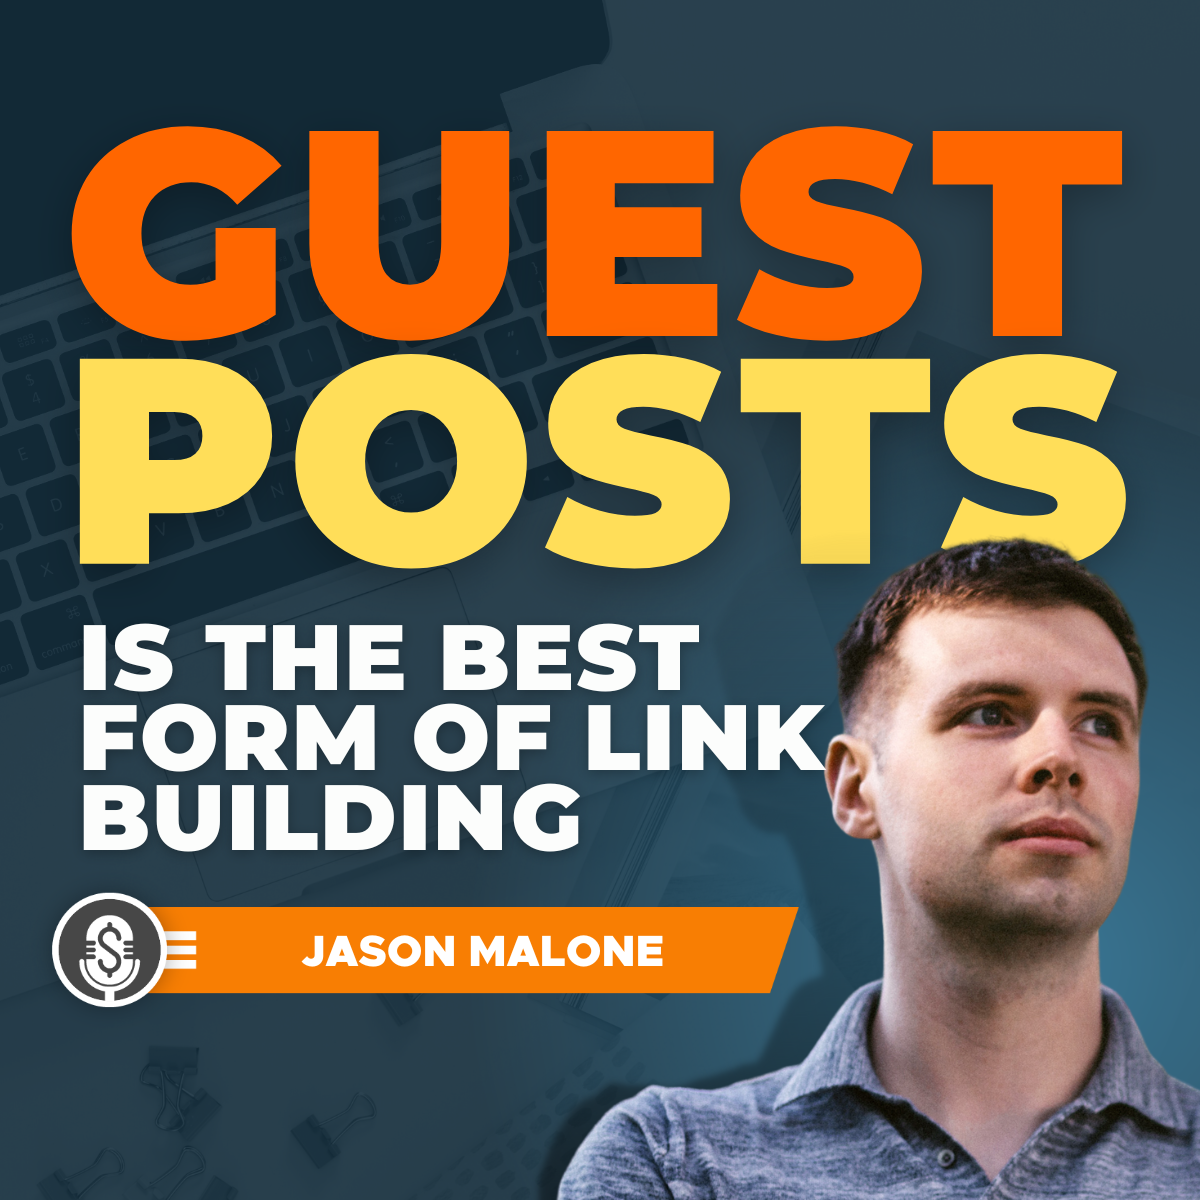 Jason Malone on why Guest Posts are the BEST form of Link-Building